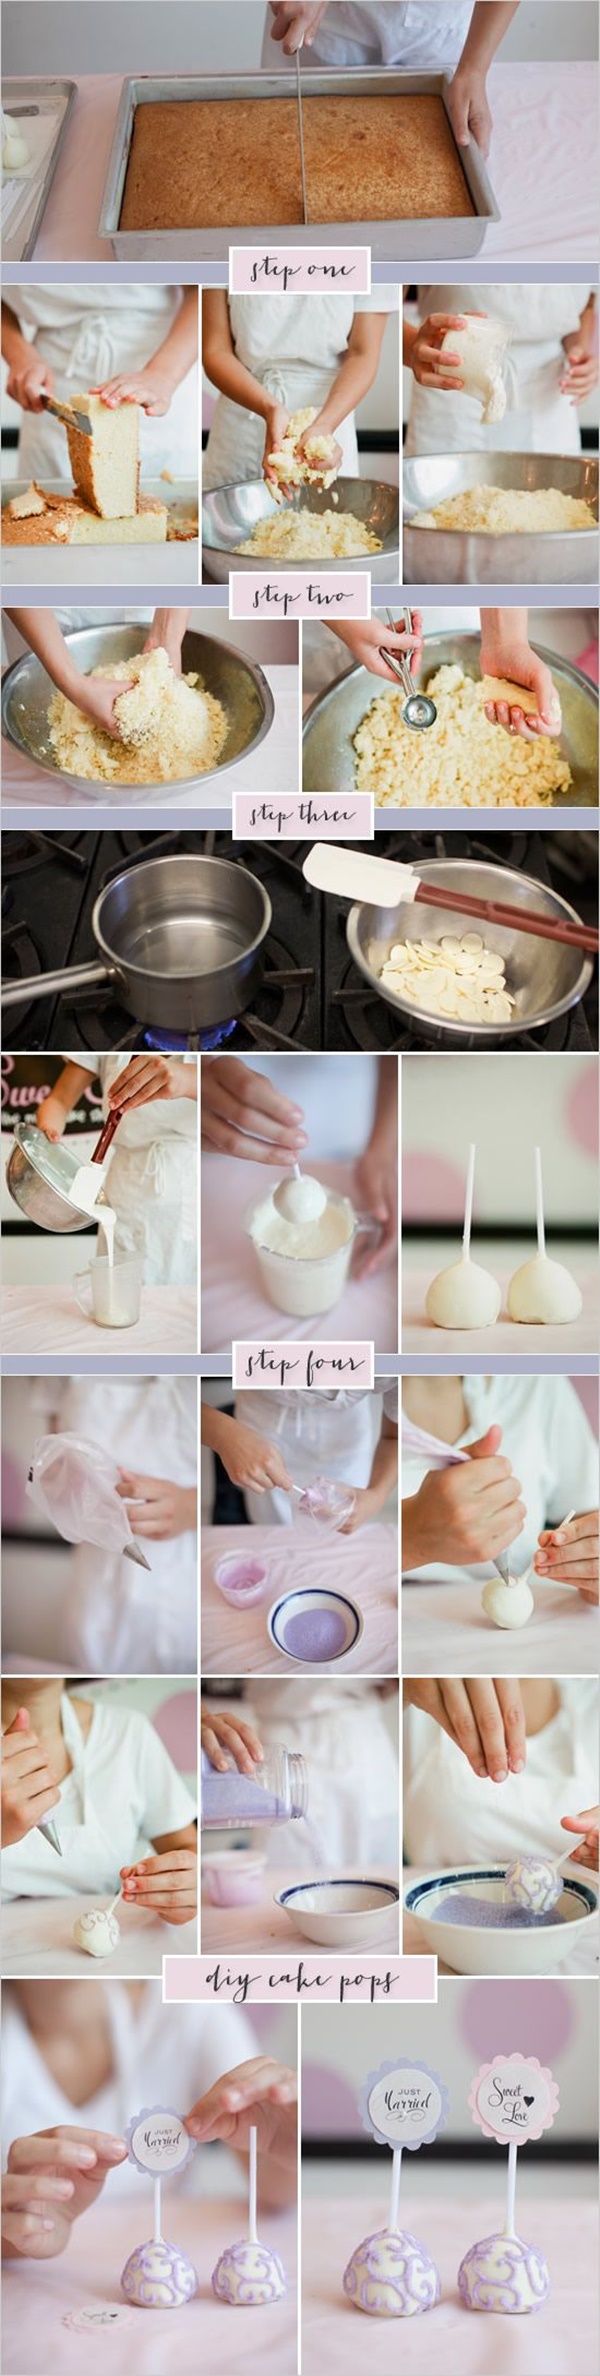 Life-Changing Baking Tips From Pro-Bakers